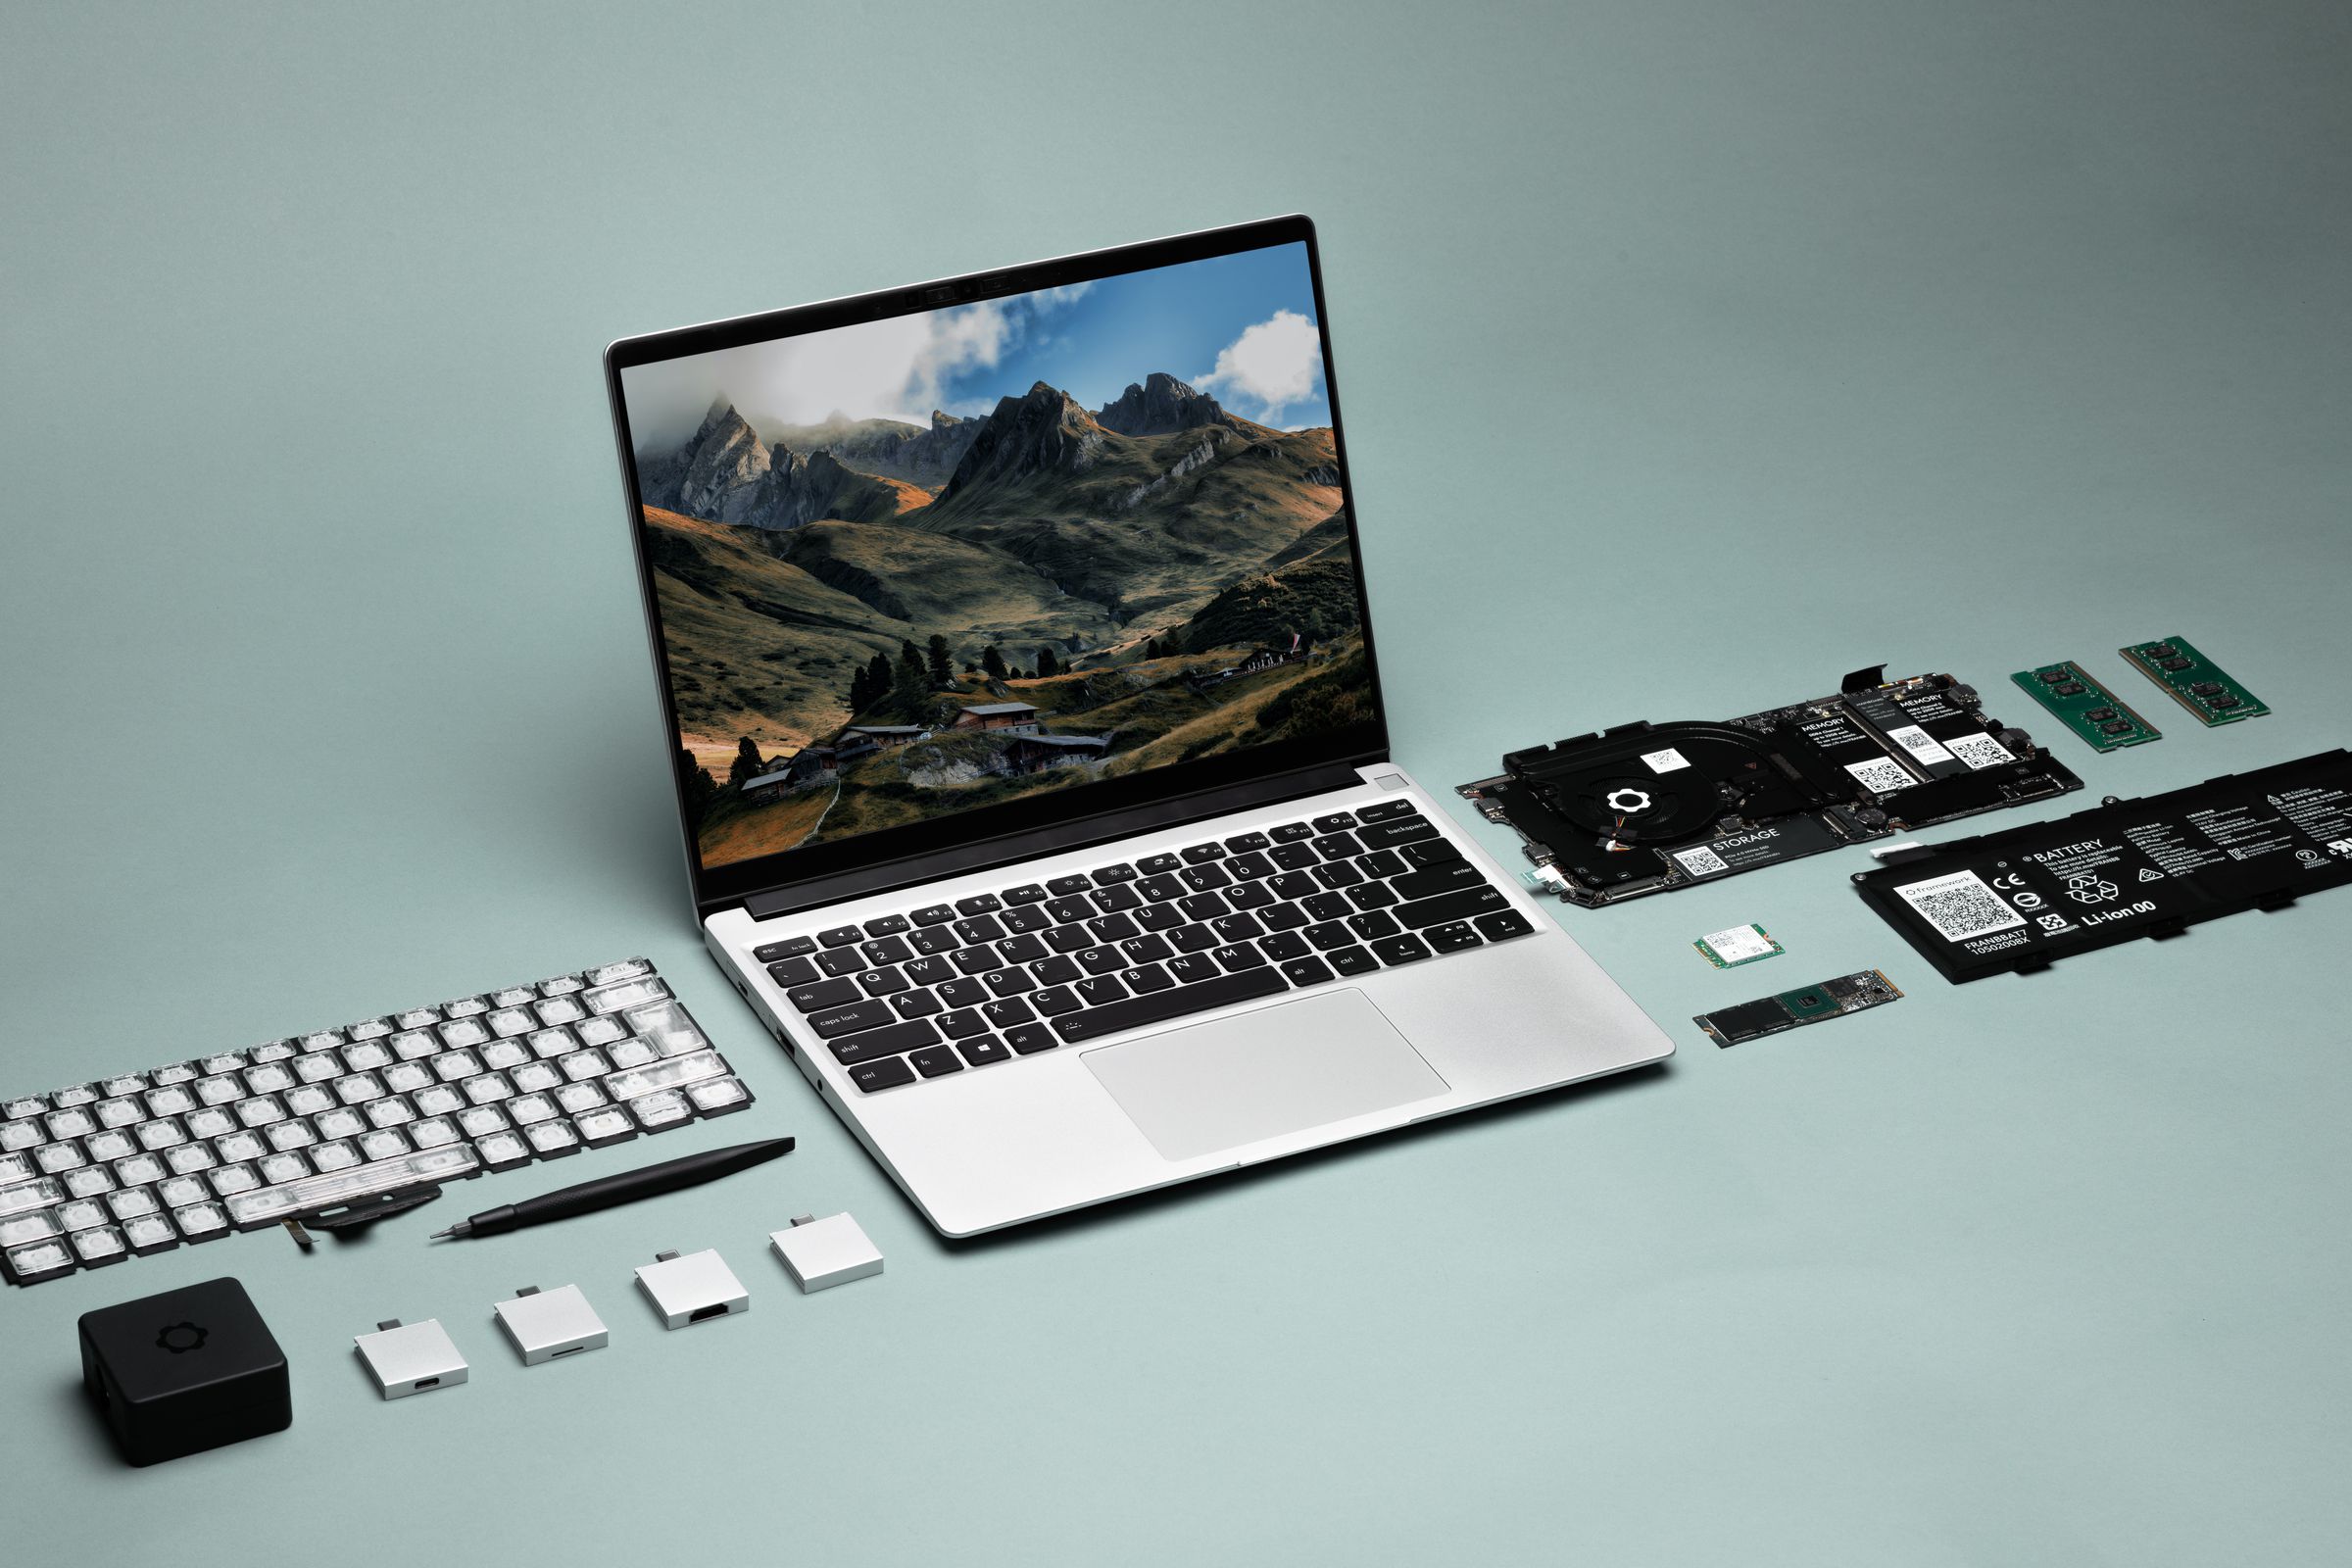 A Framework Laptop angled slightly to the right, seen from above. The screen displays mountains and a valley. On either side are a number of modules.